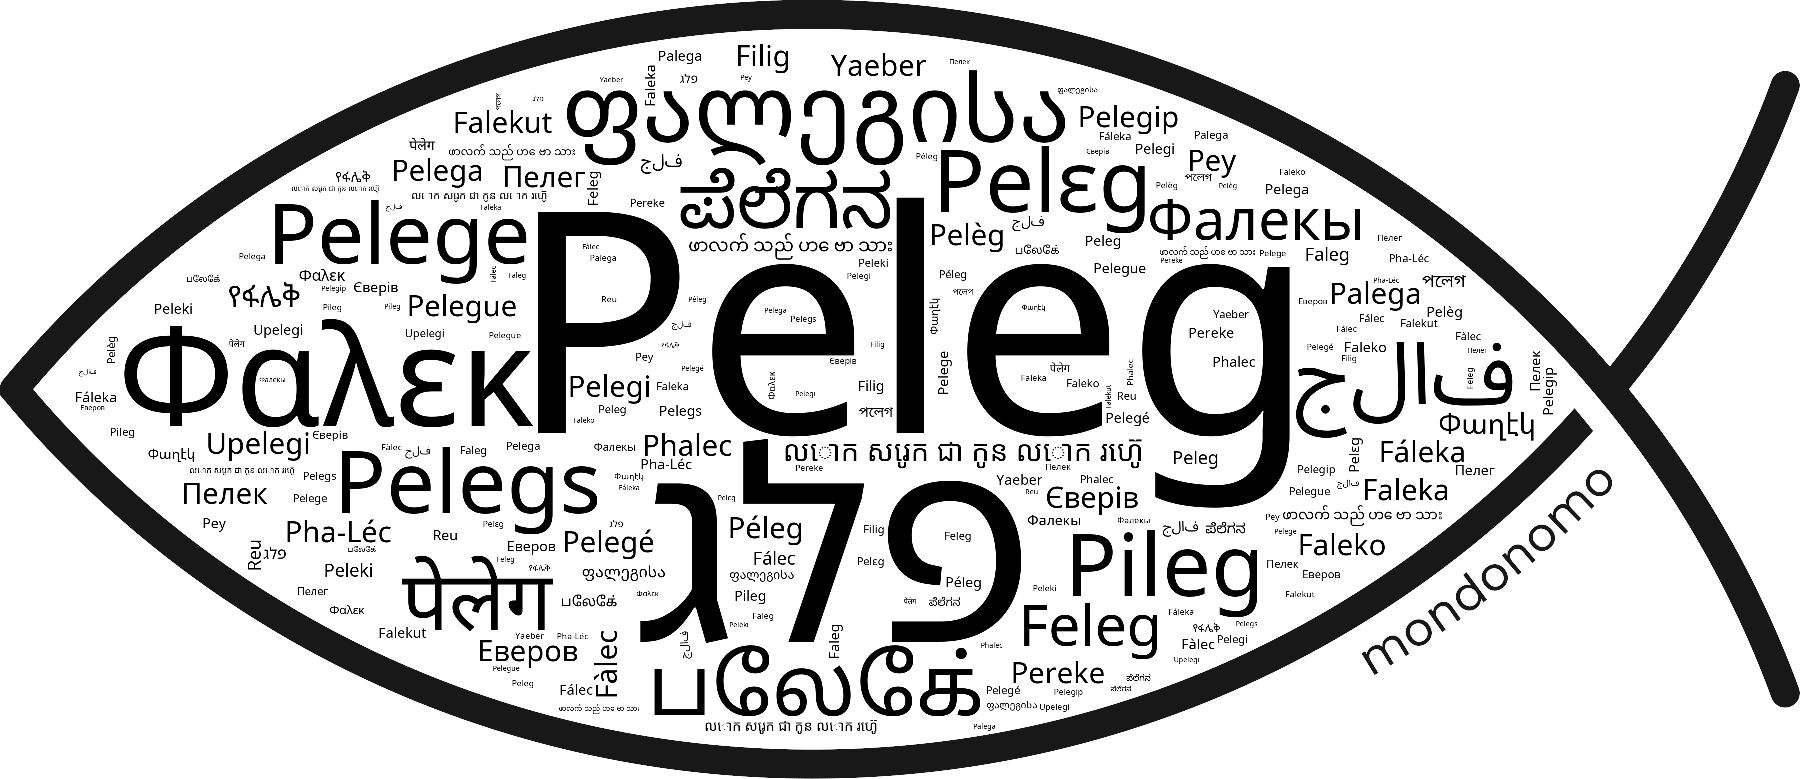 Name Peleg in the world's Bibles